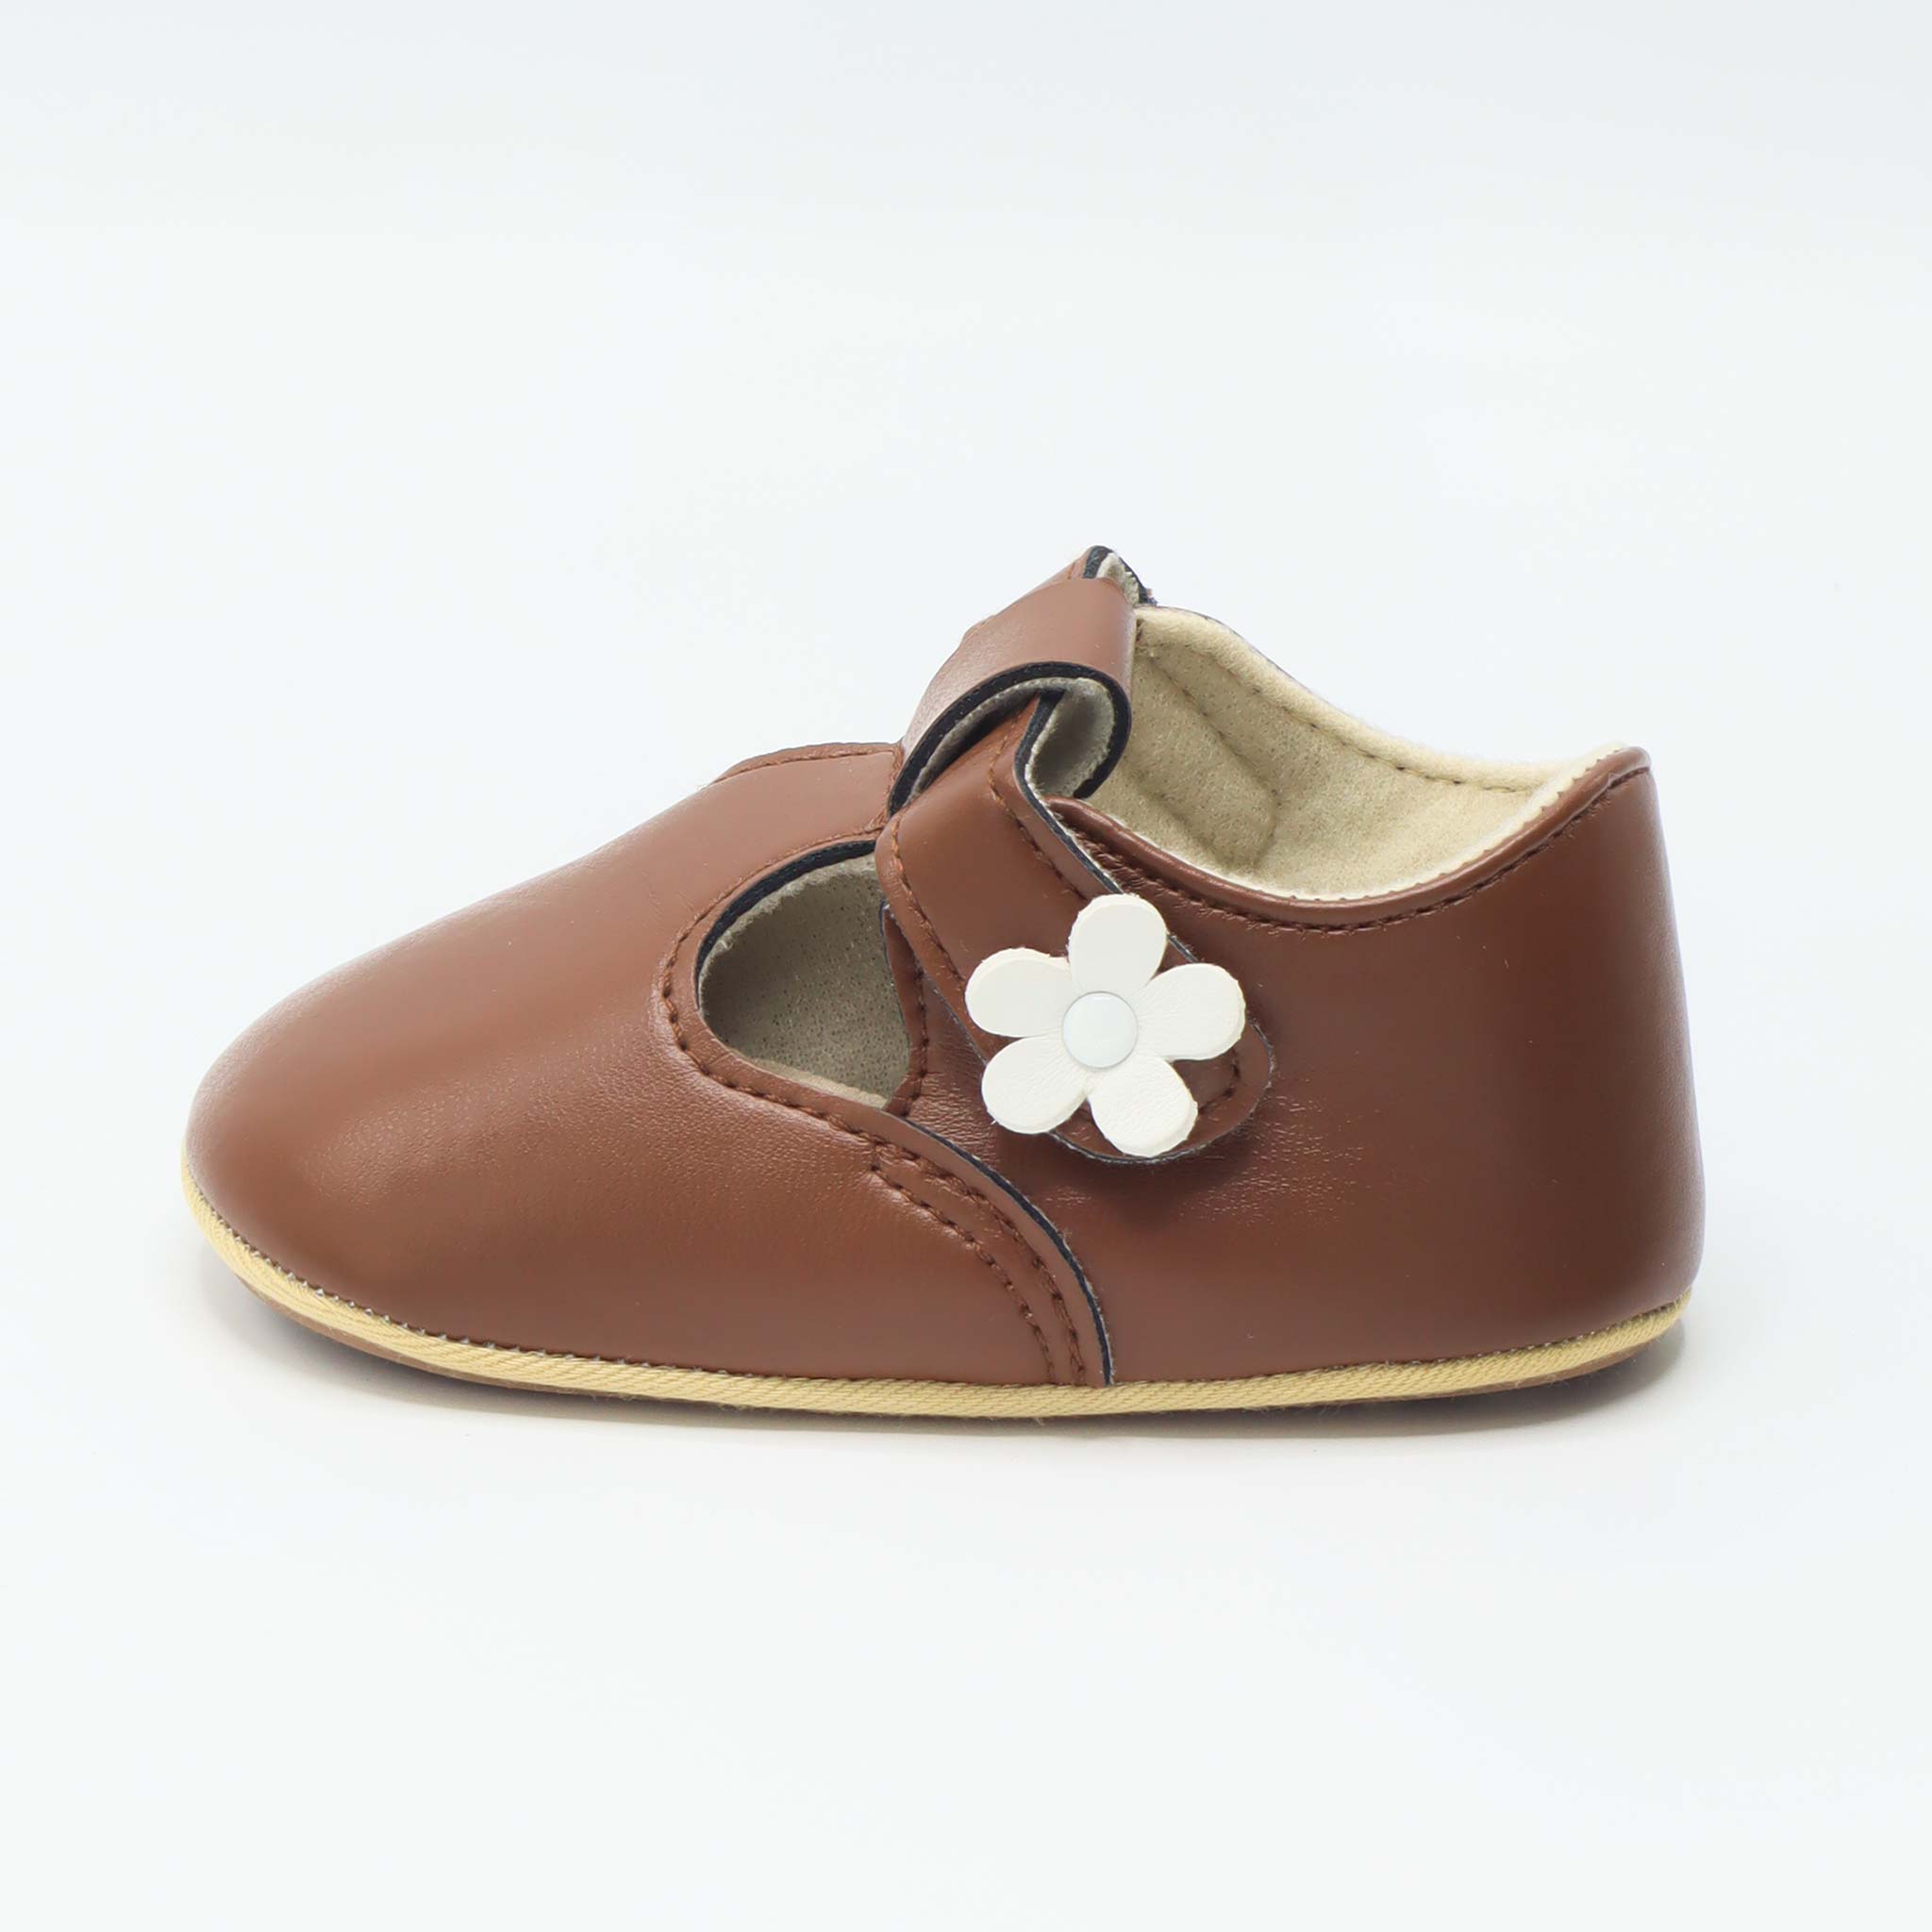 Baby Shoes Brown Color with White Flower